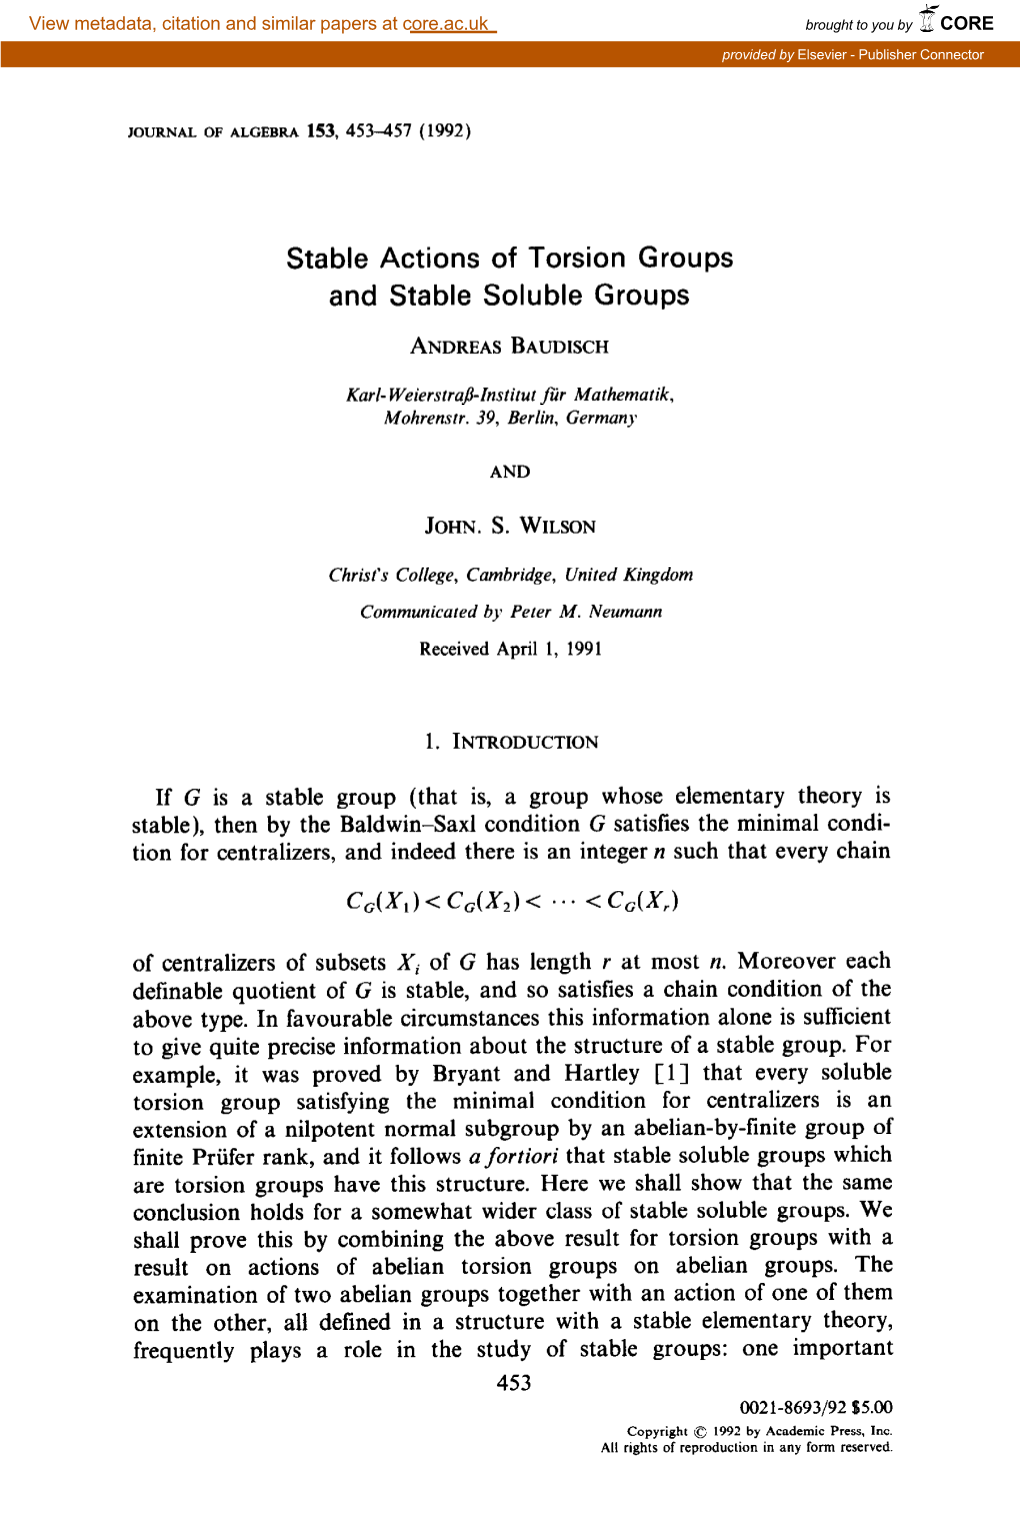 Stable Actions of Torsion Groups and Stable Soluble Groups